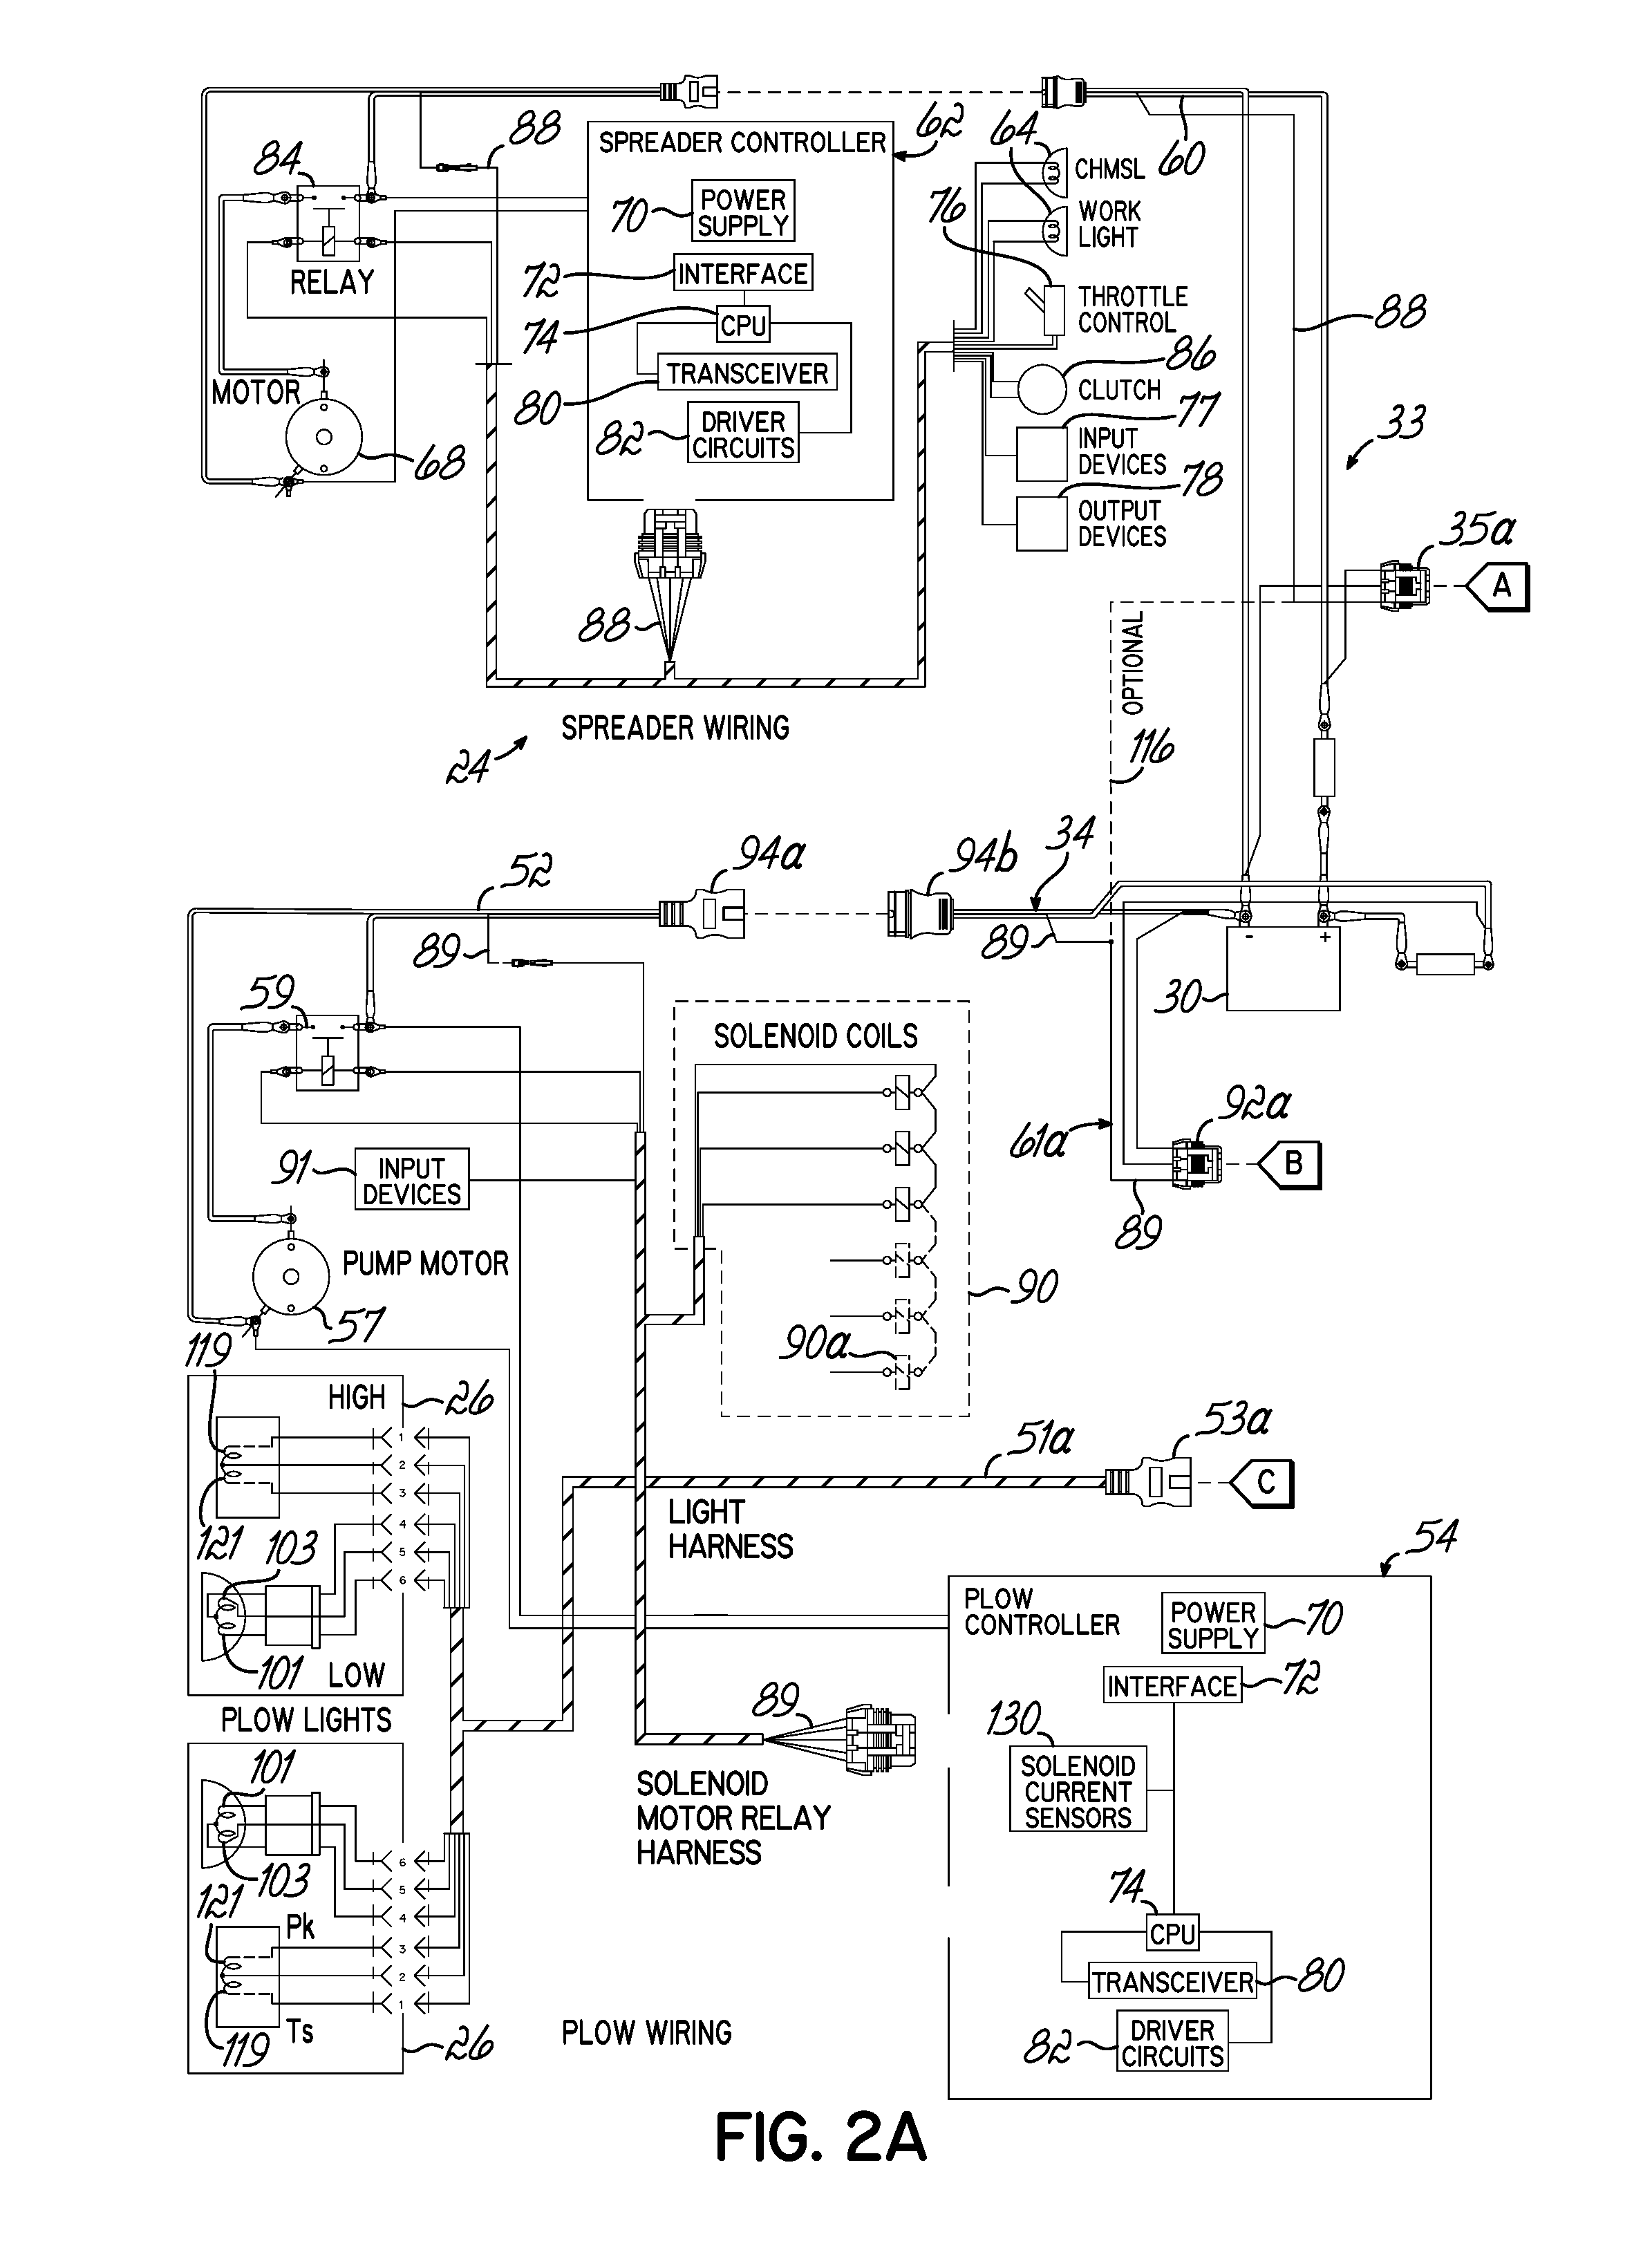 Vehicle mounted accessory with multiplexing